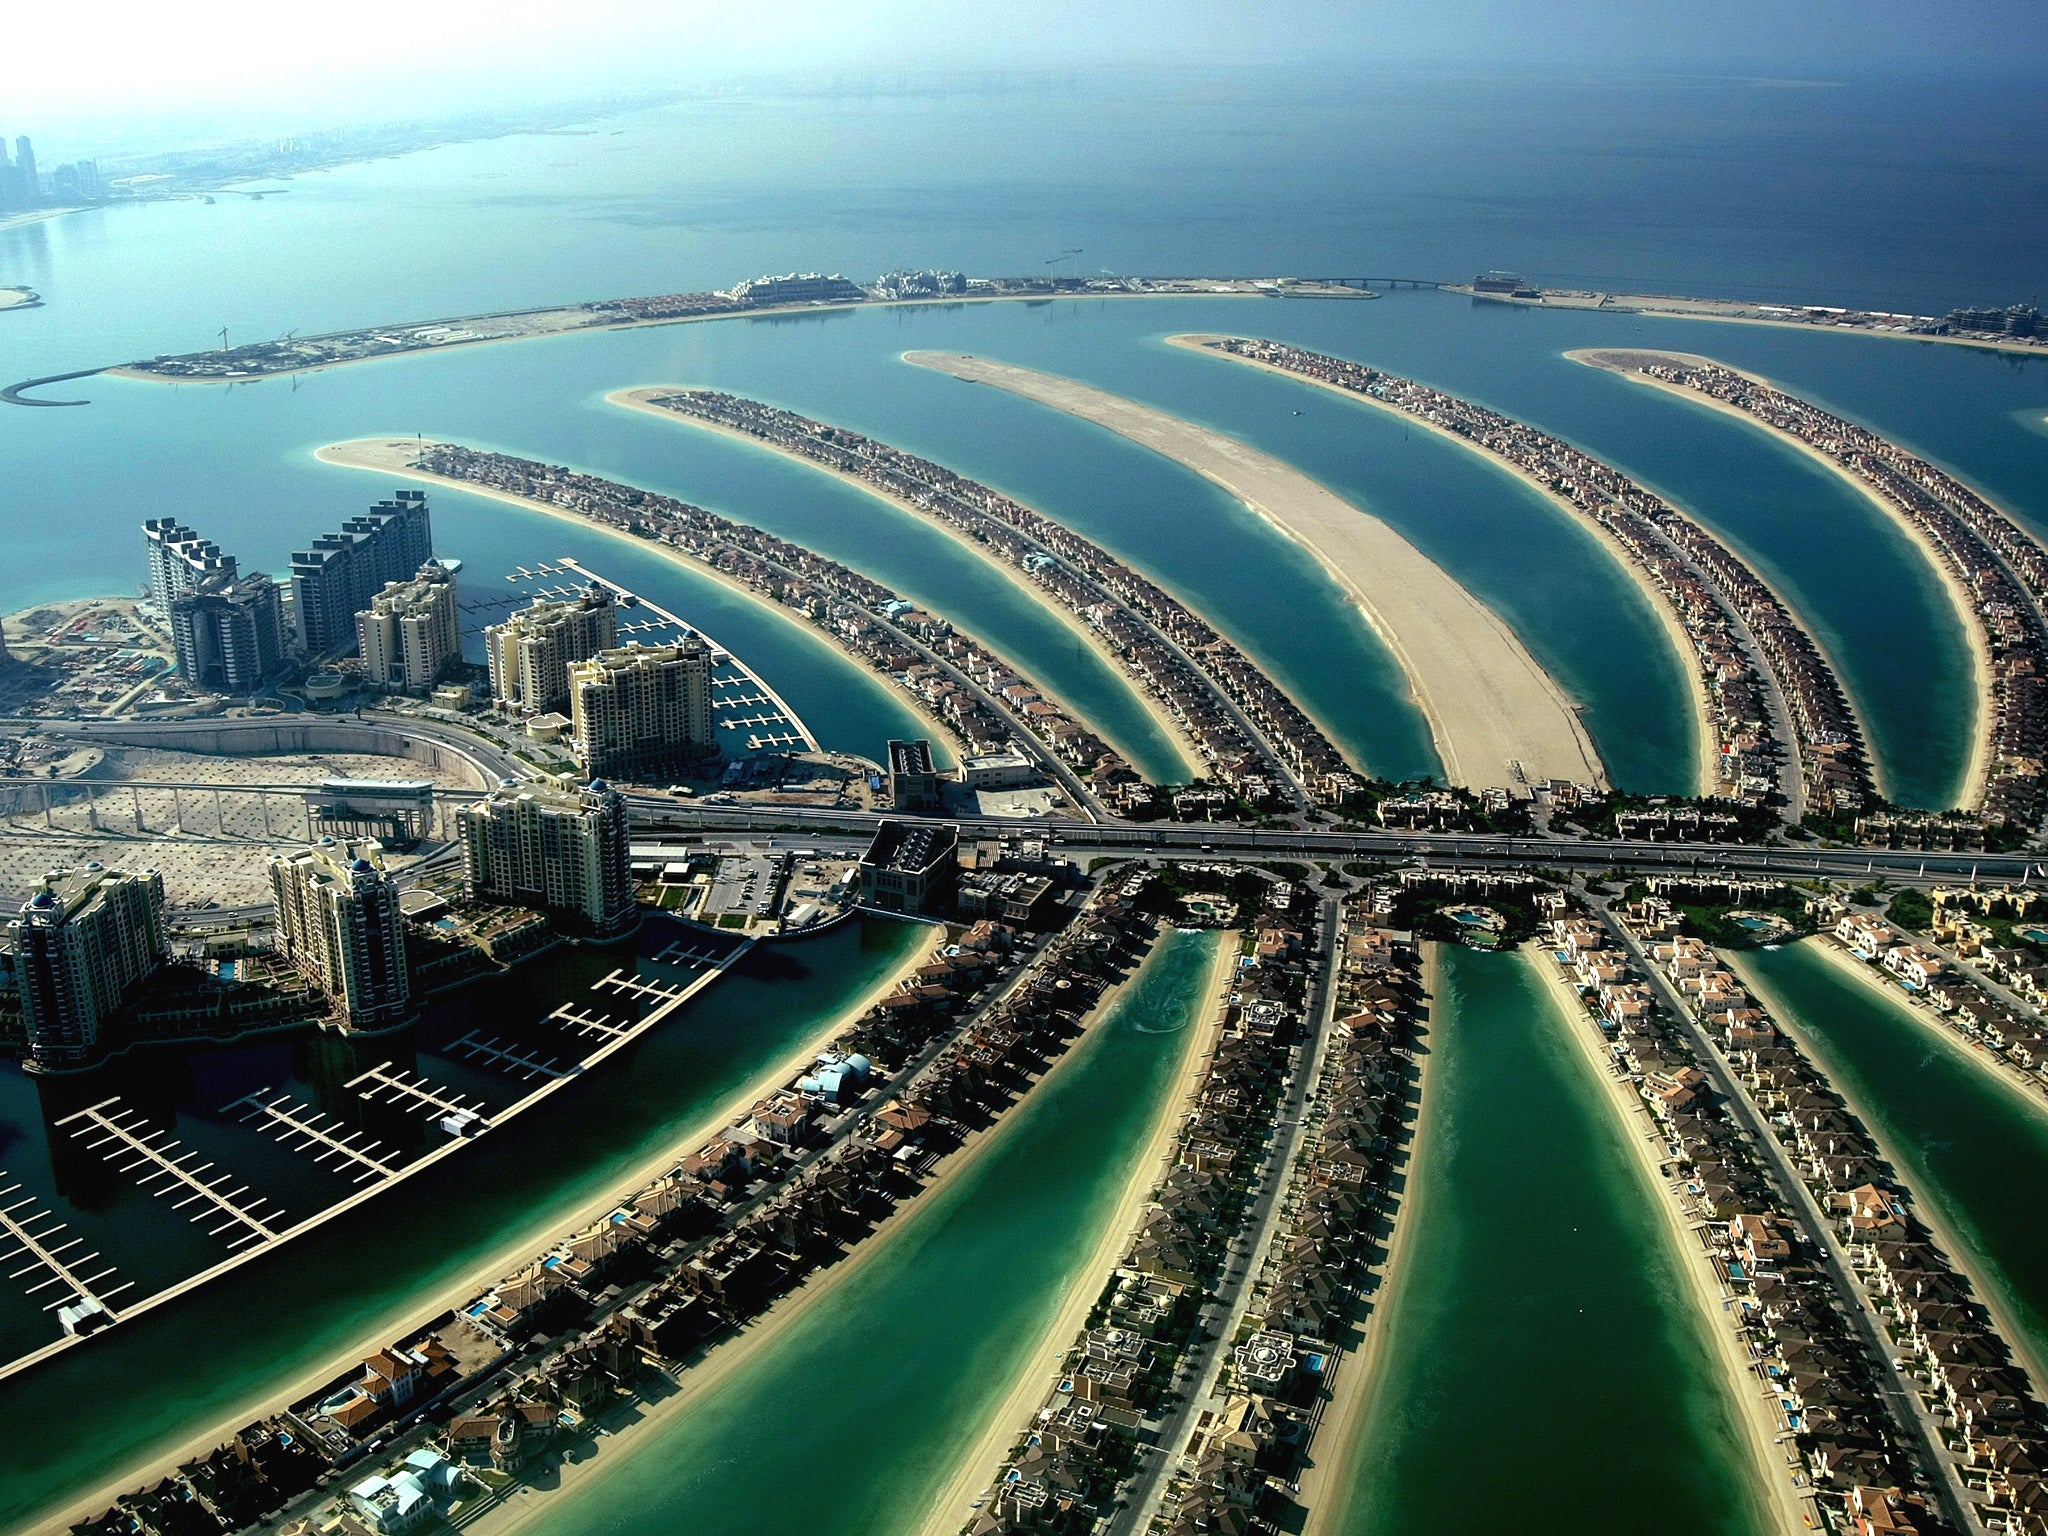 The manmade islands of the Palm Jumeirah, built with 94,000,000 cubic metres of sand